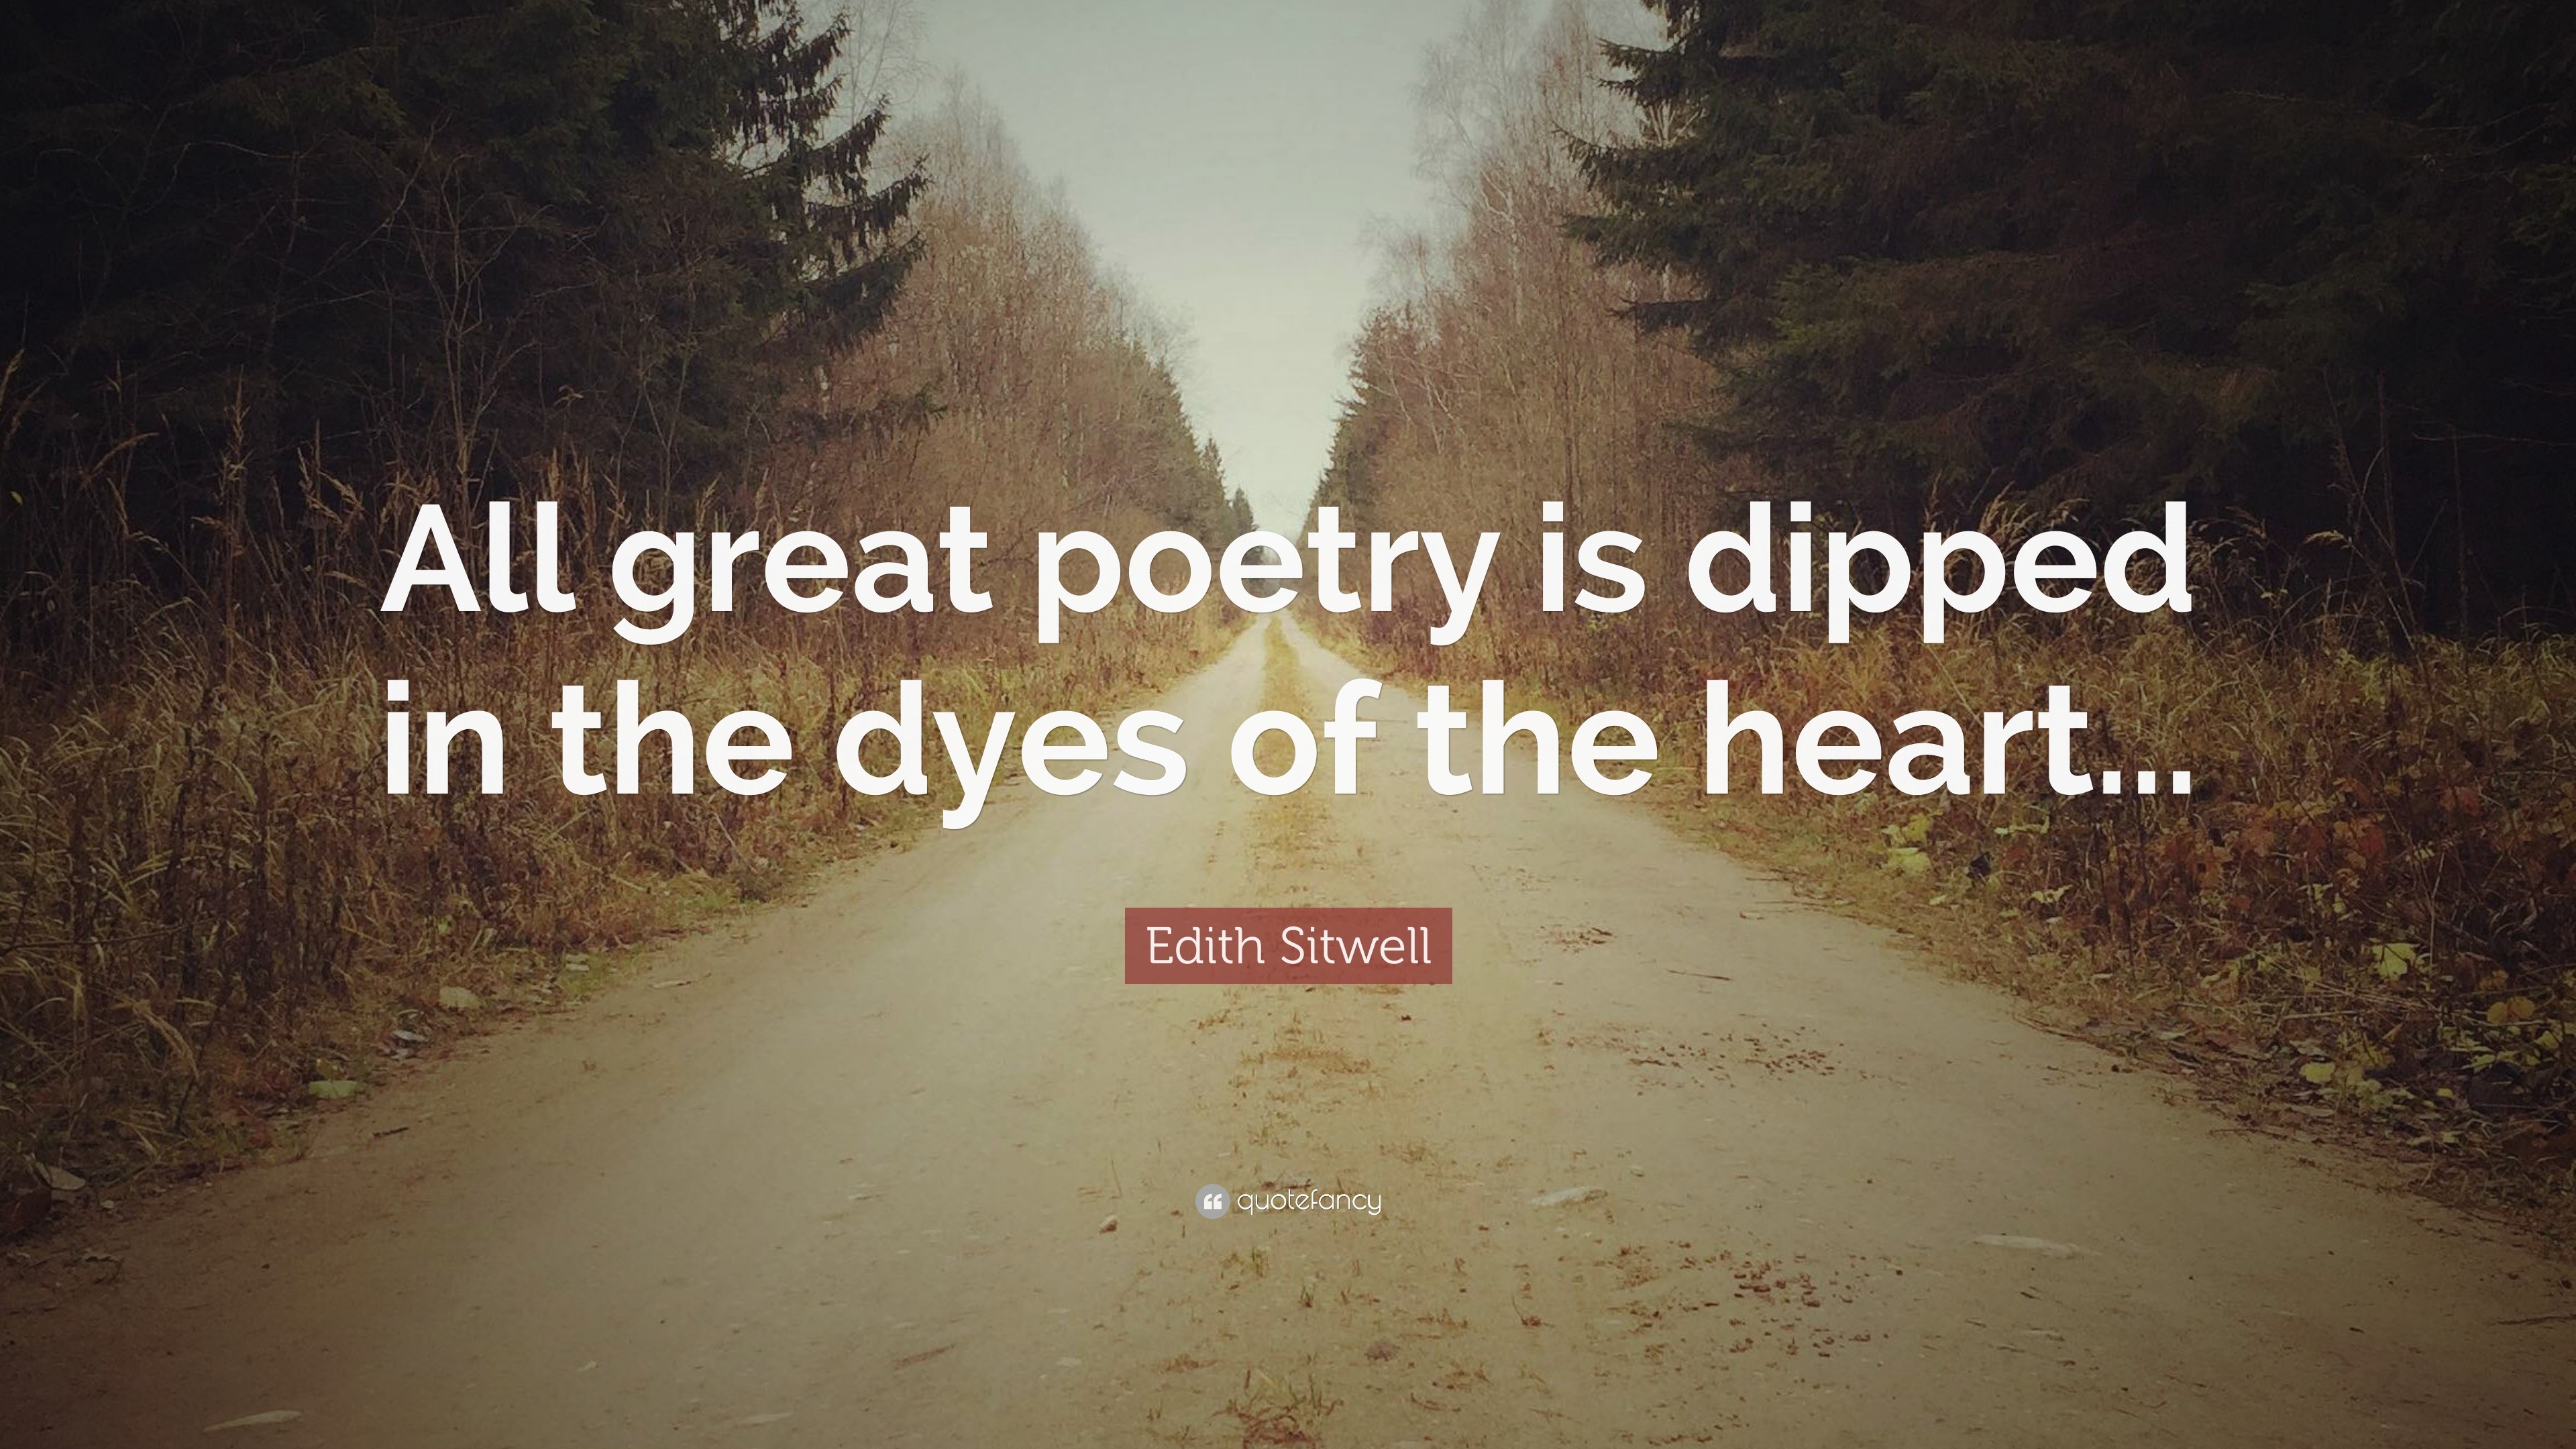 Edith Sitwell Quote: “All great poetry is dipped in the dyes of the